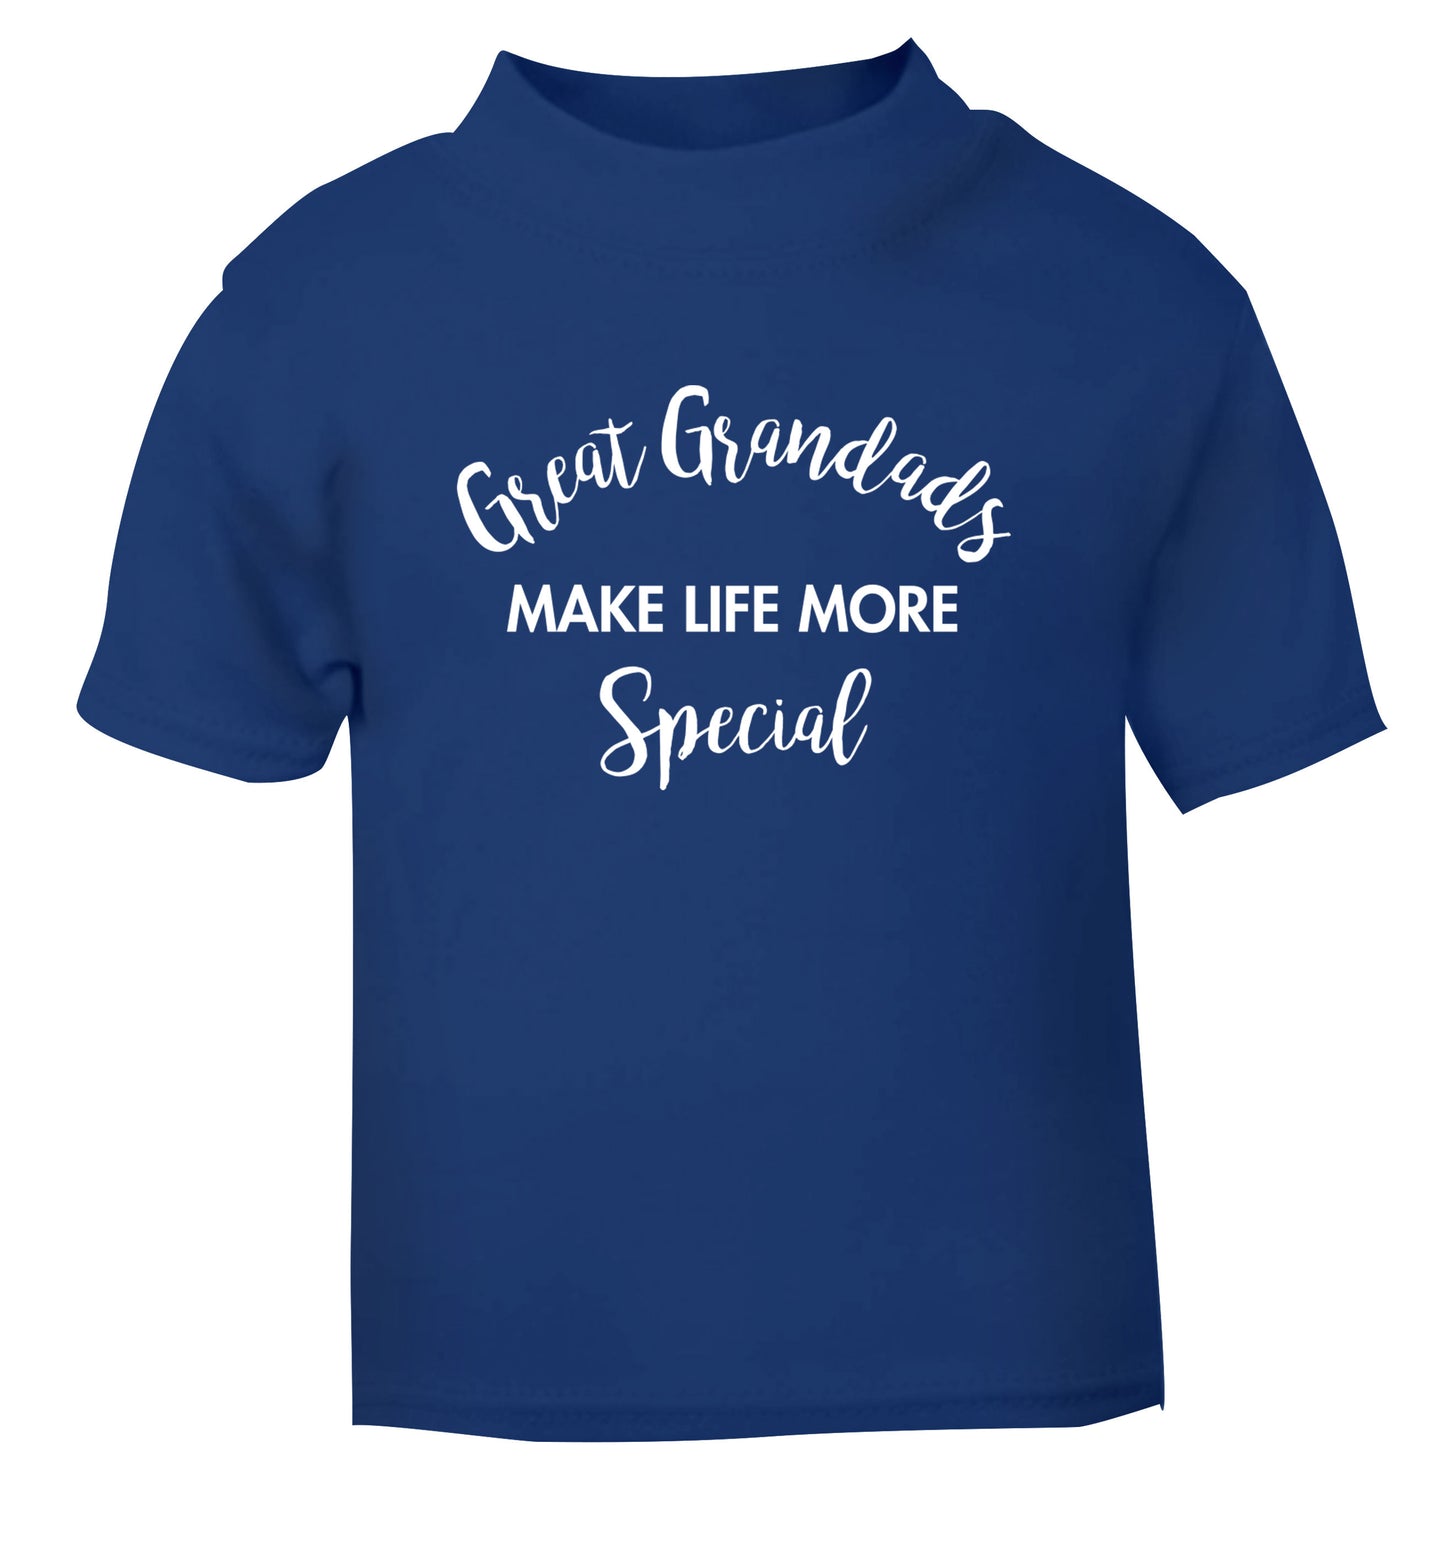 Great Grandads make life more special blue Baby Toddler Tshirt 2 Years